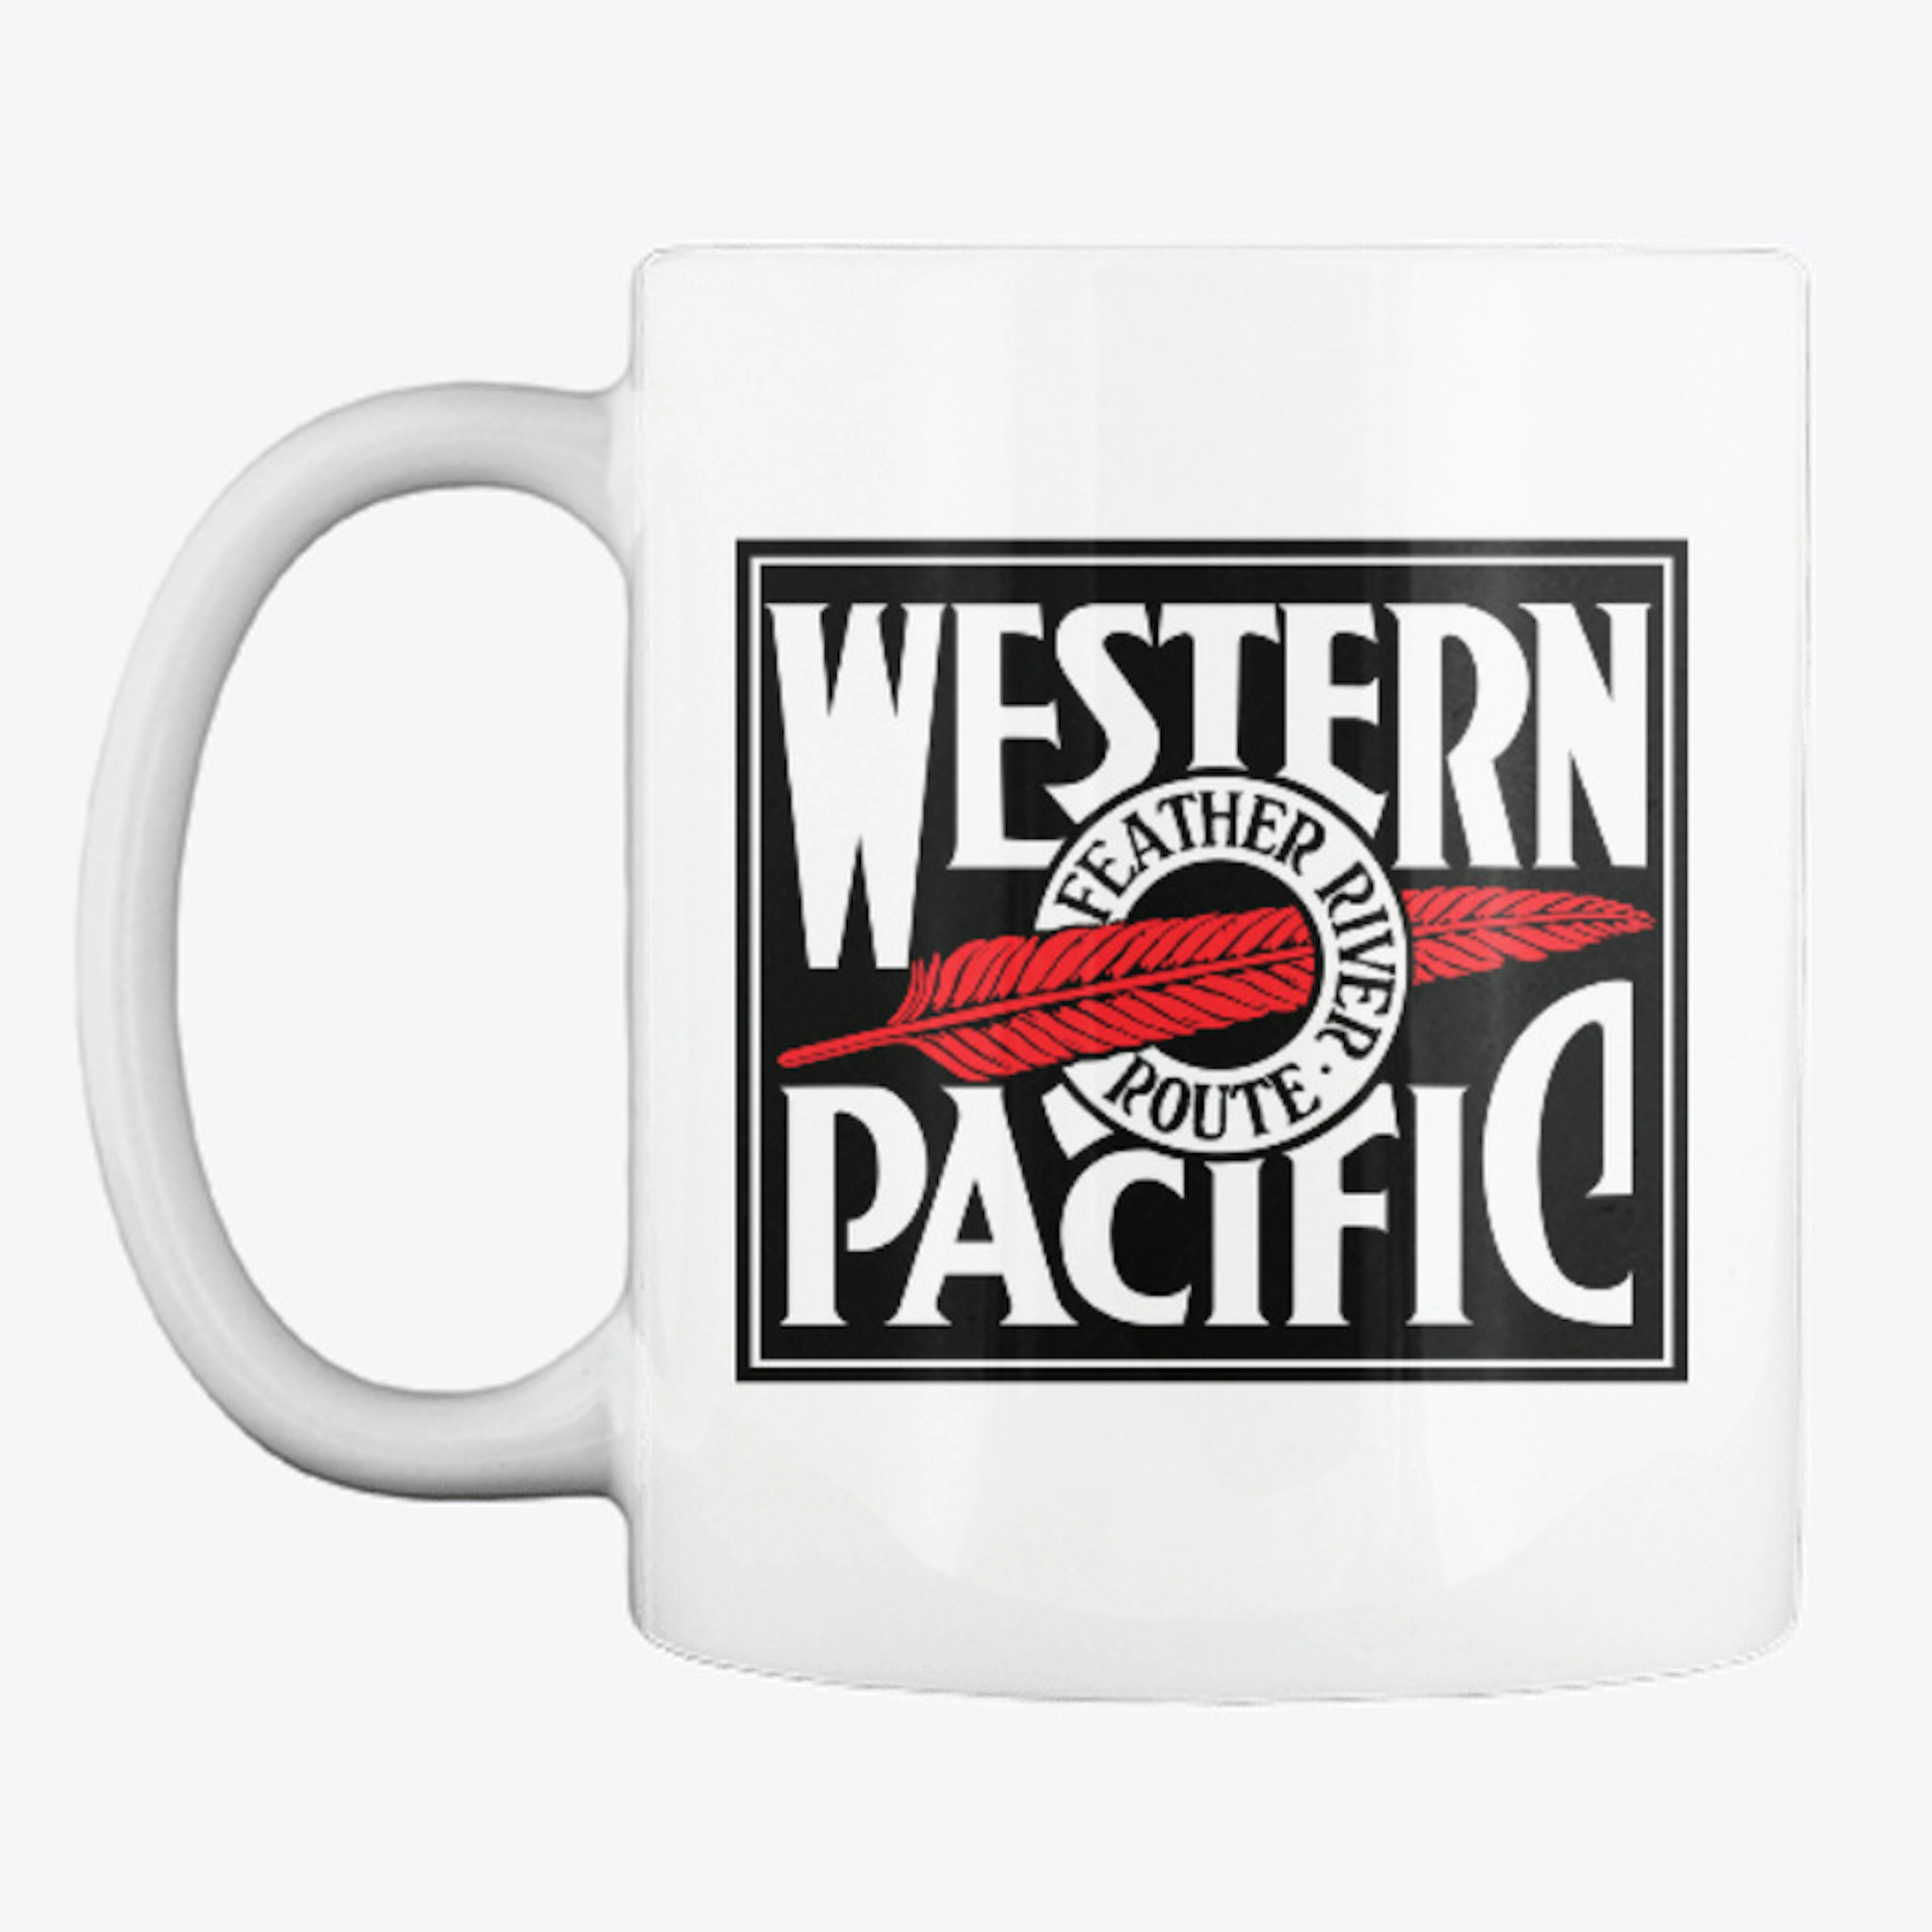 WP Feather River Route Mug